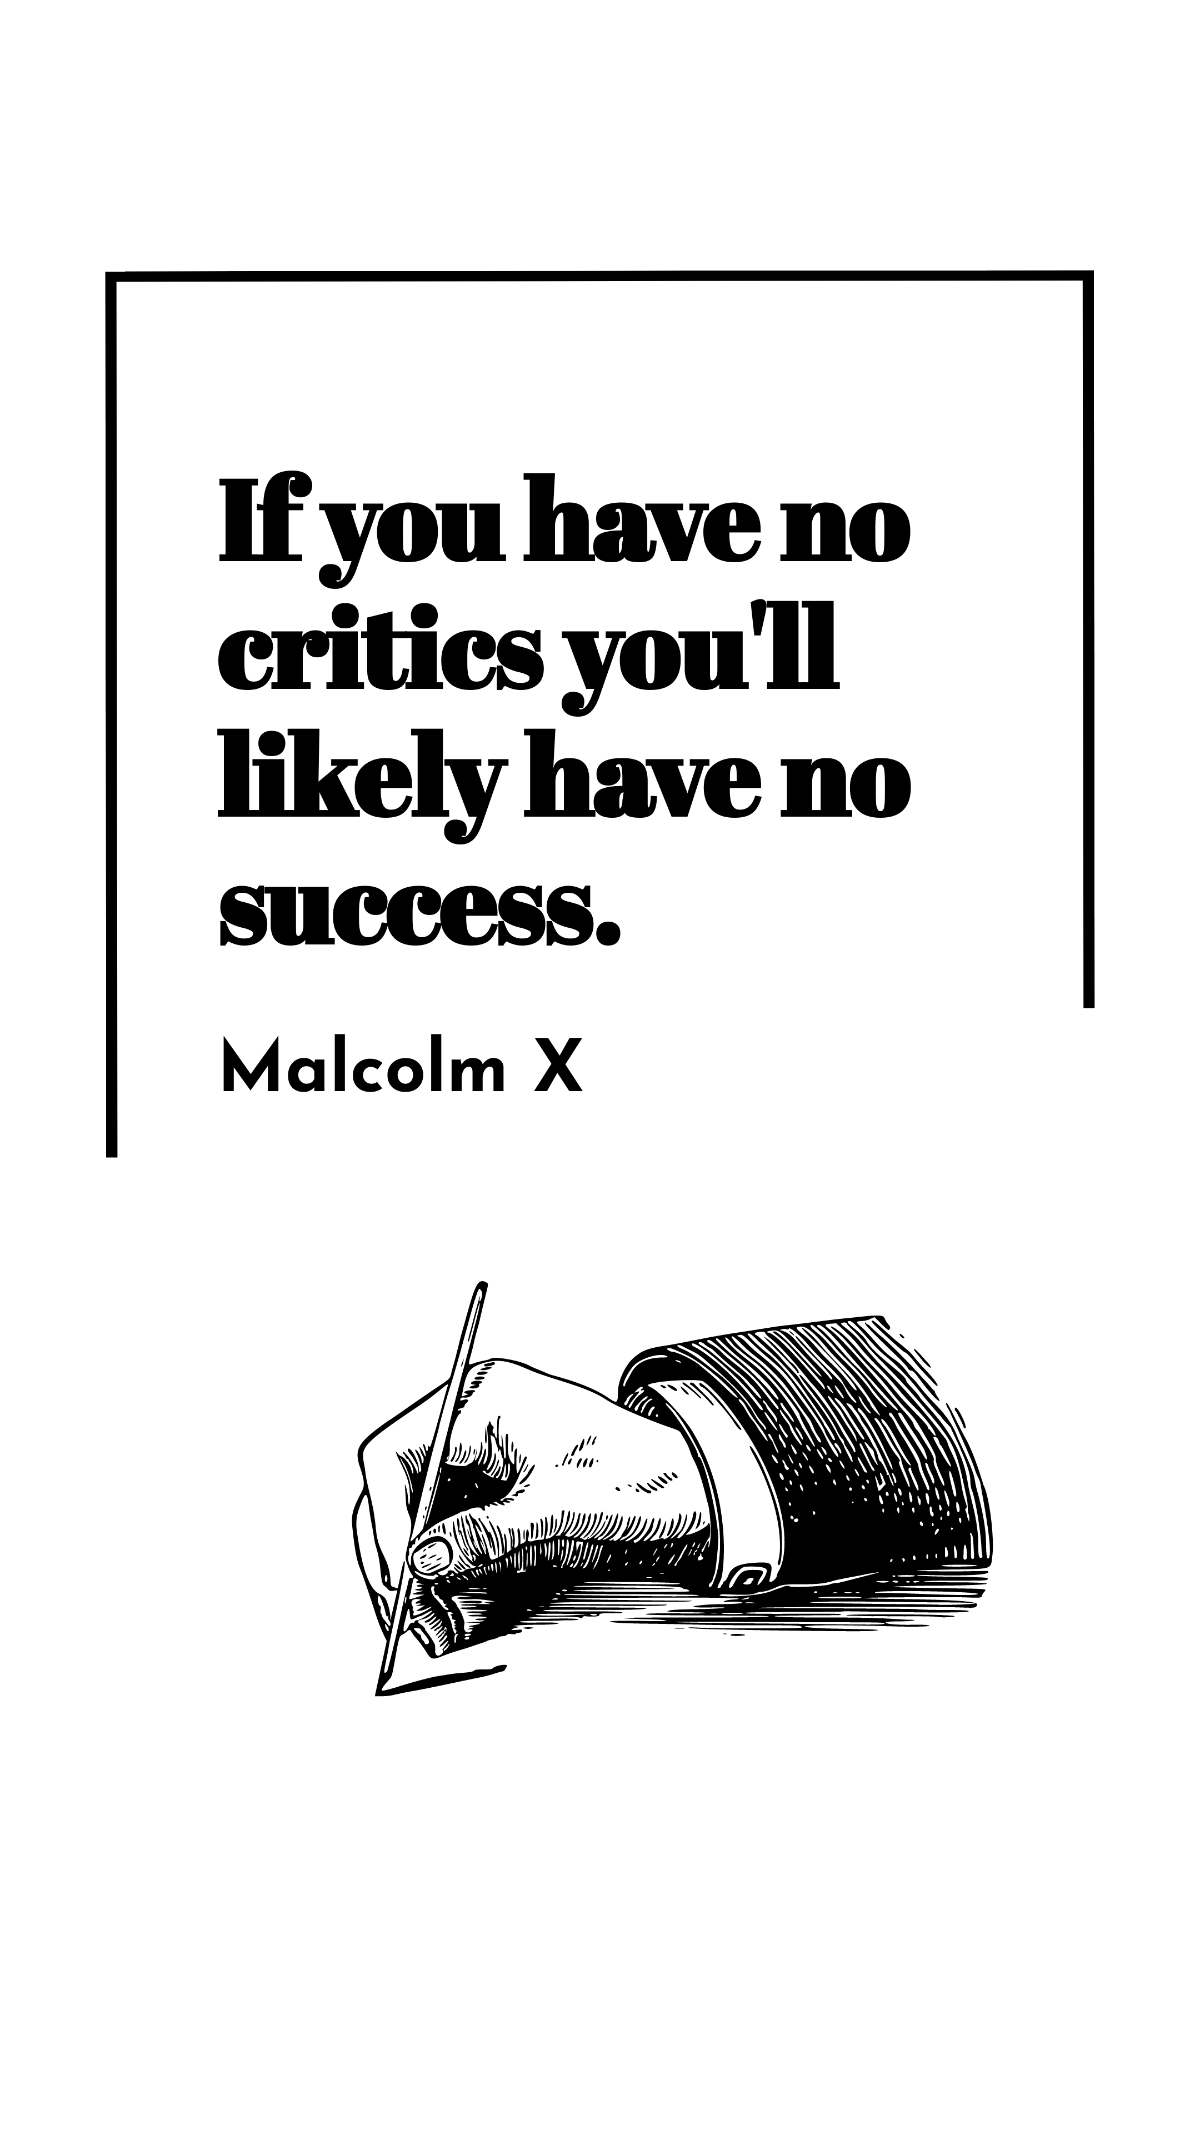 Malcolm X - If you have no critics you'll likely have no success.